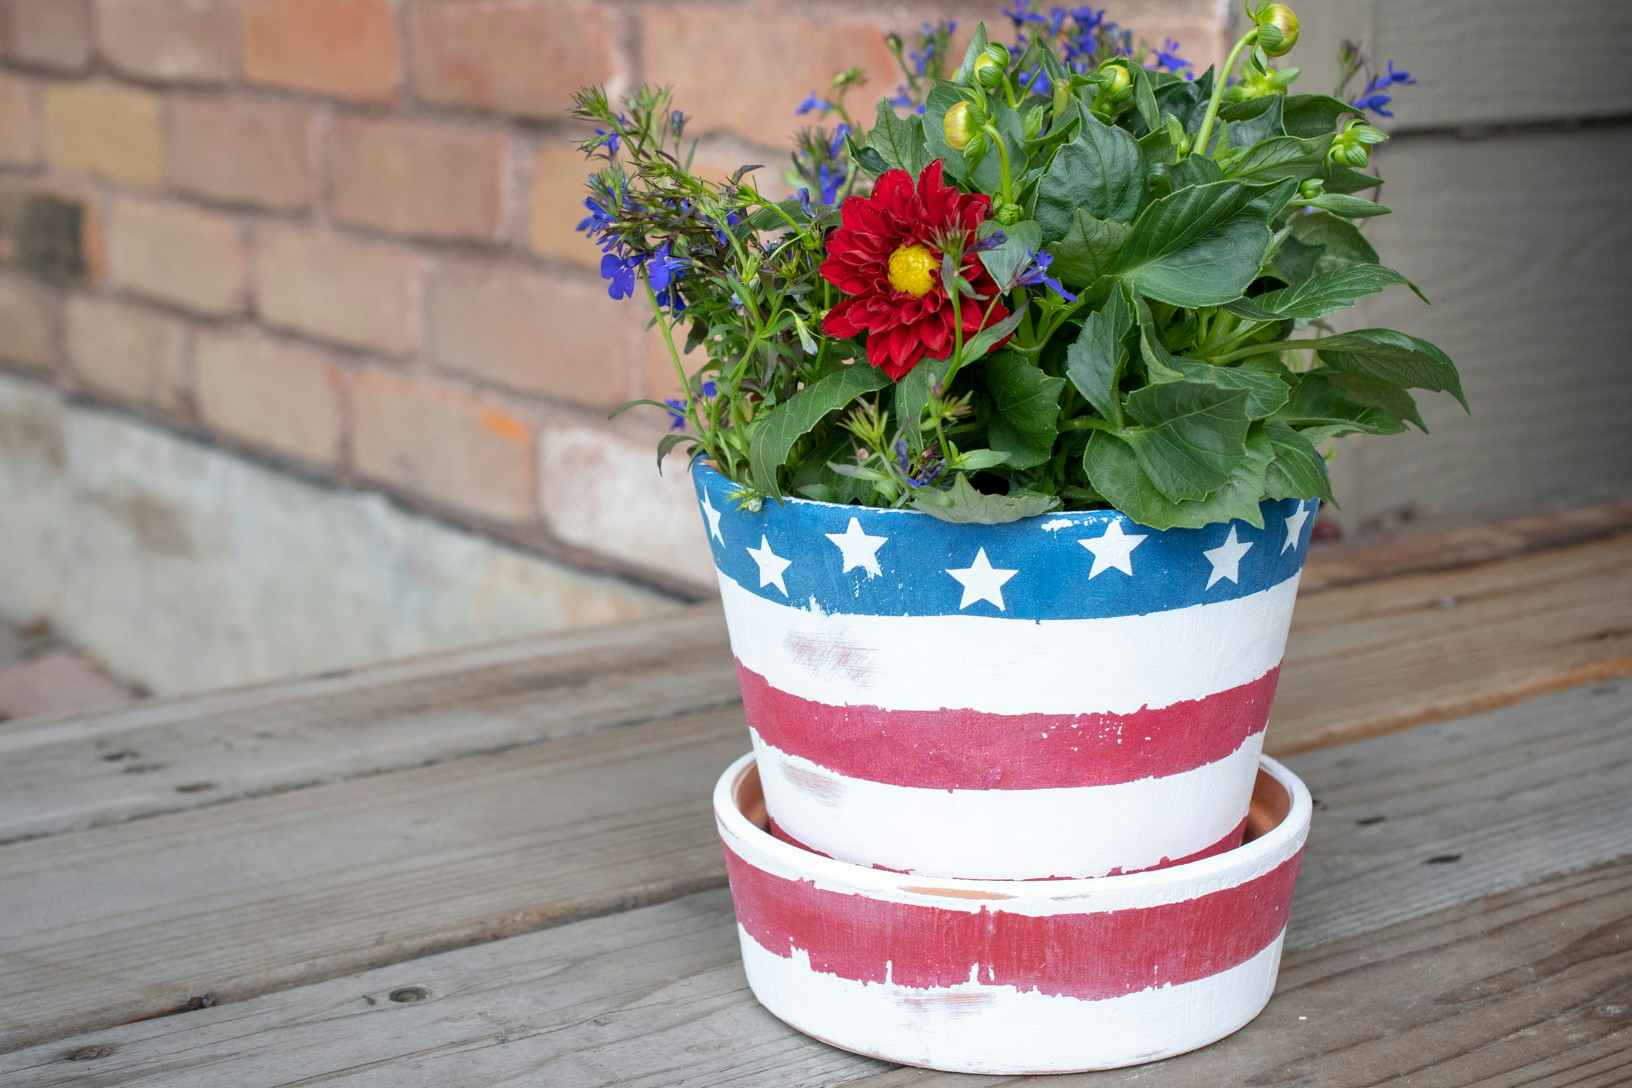 A terracotta plant pot painted to look like an American flag with star stickers.